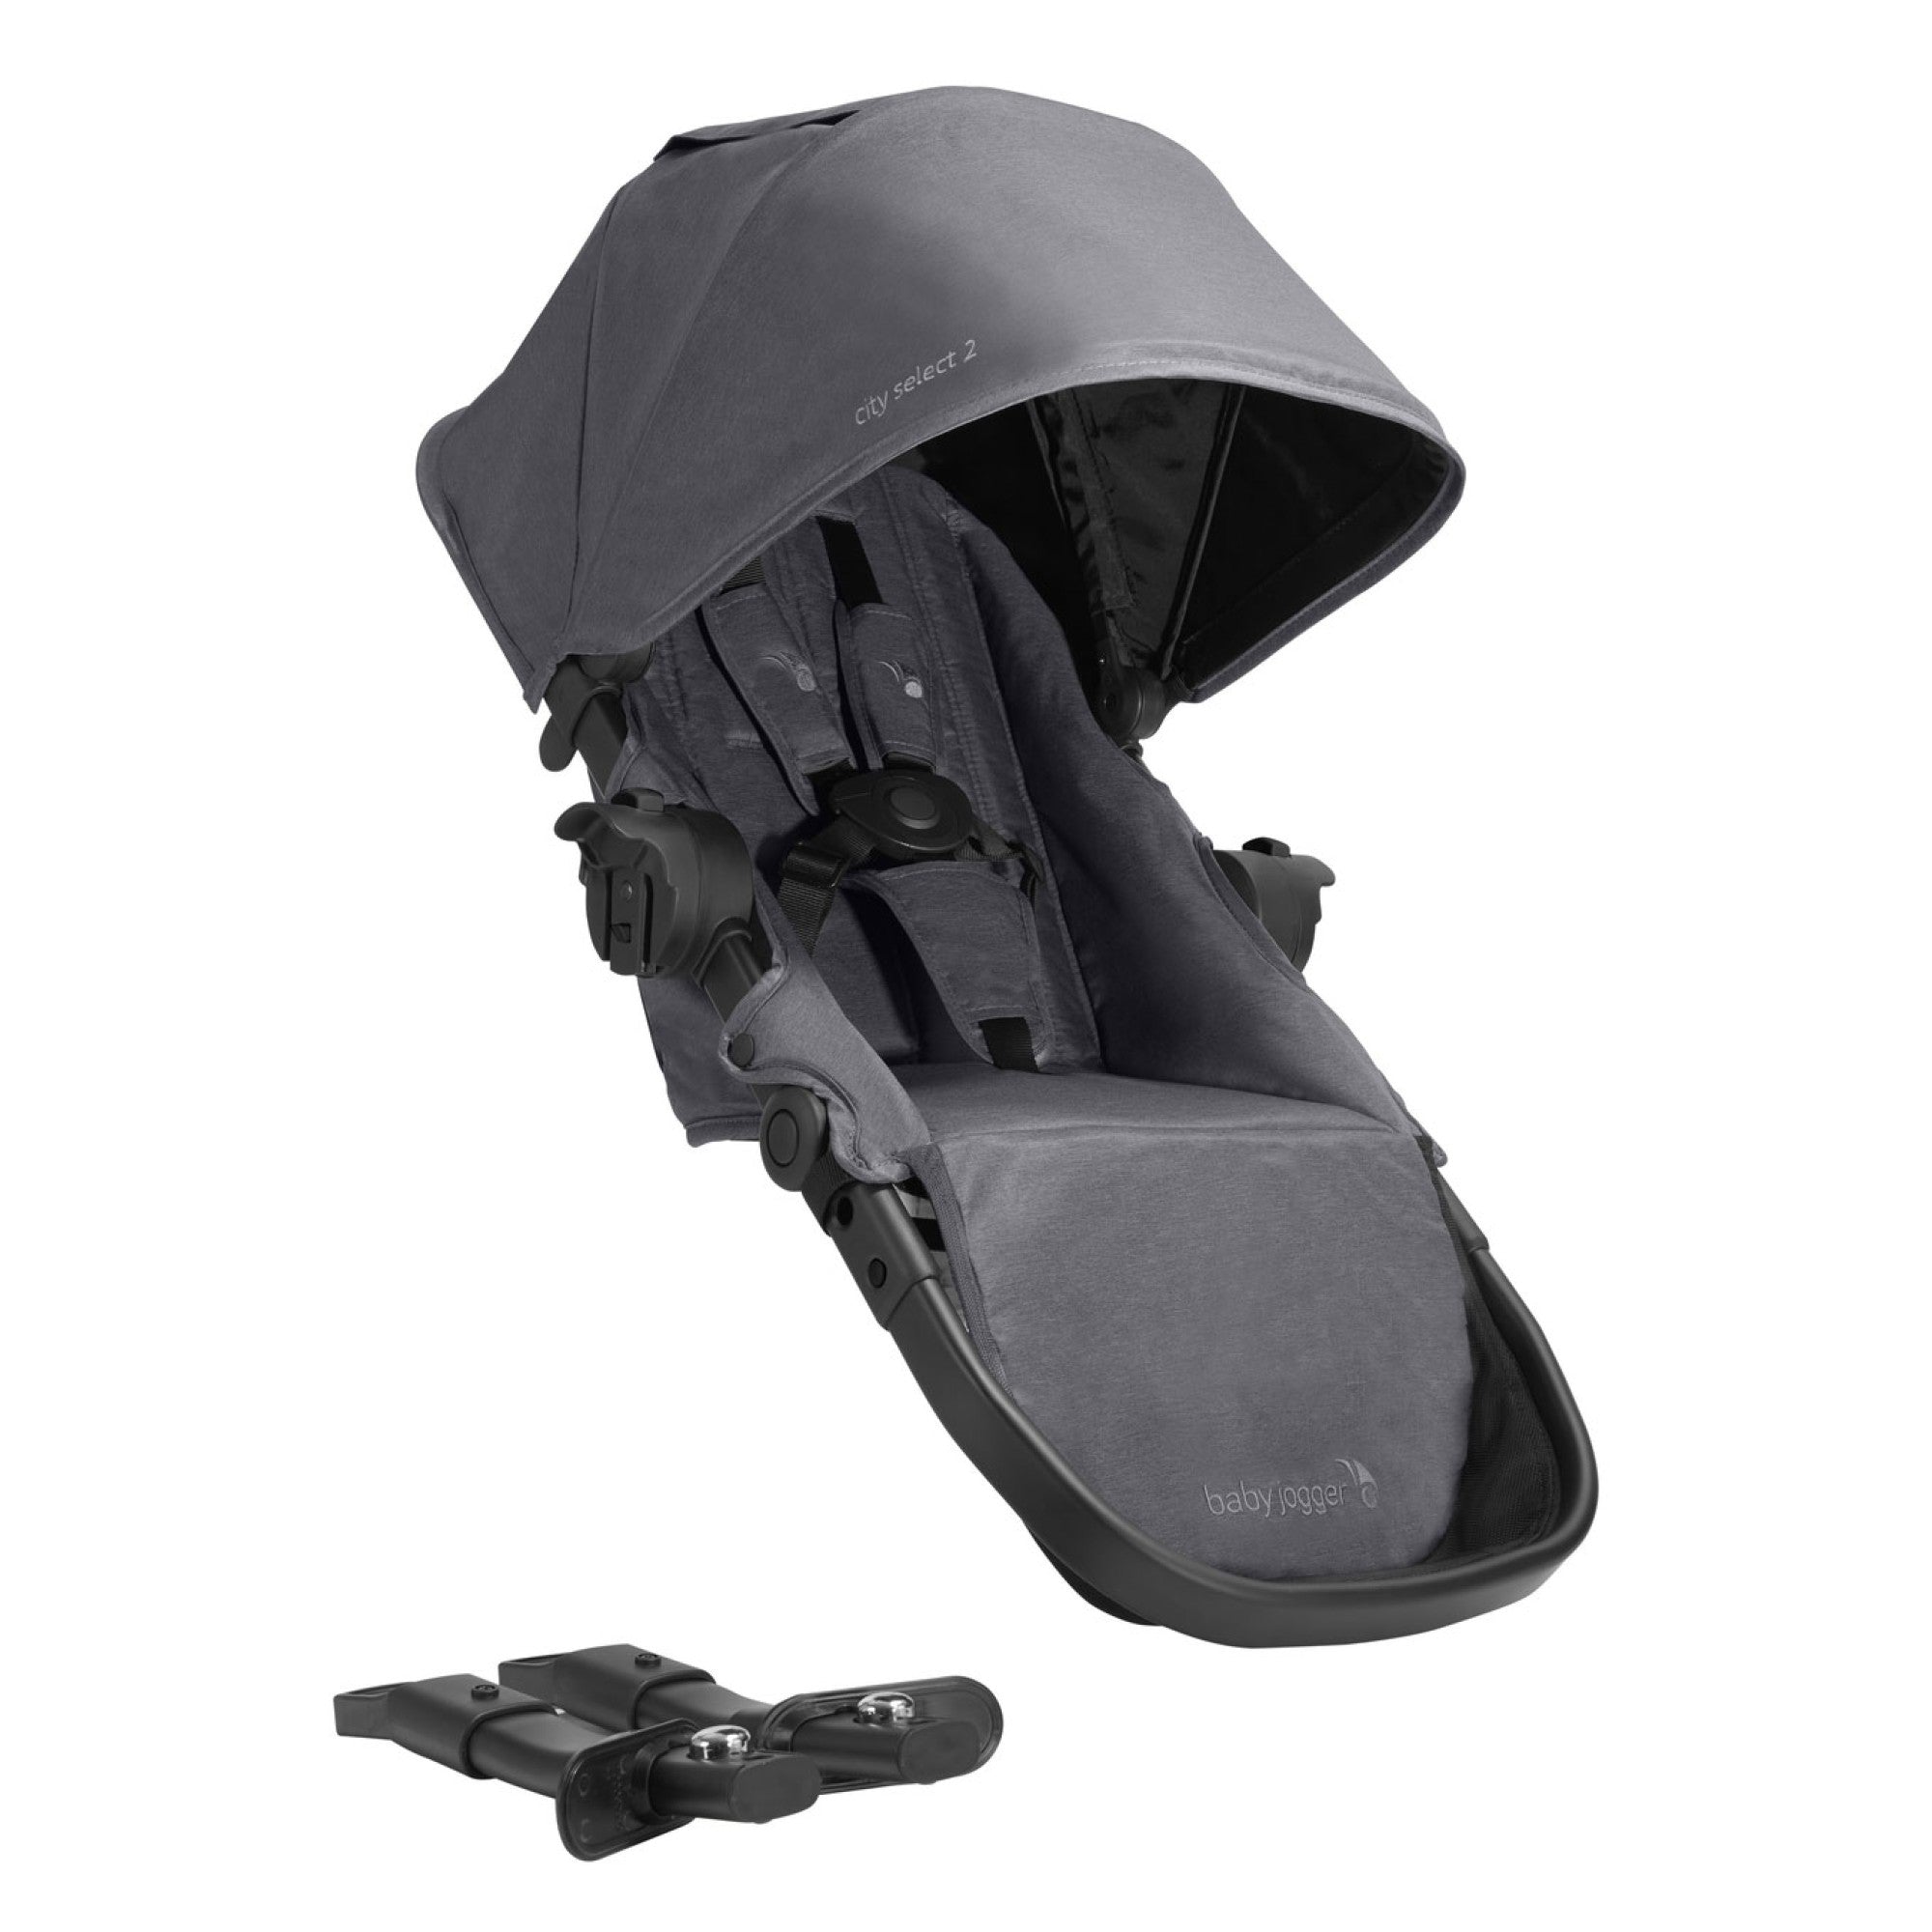 Baby Jogger: Additional City Select 2 seat